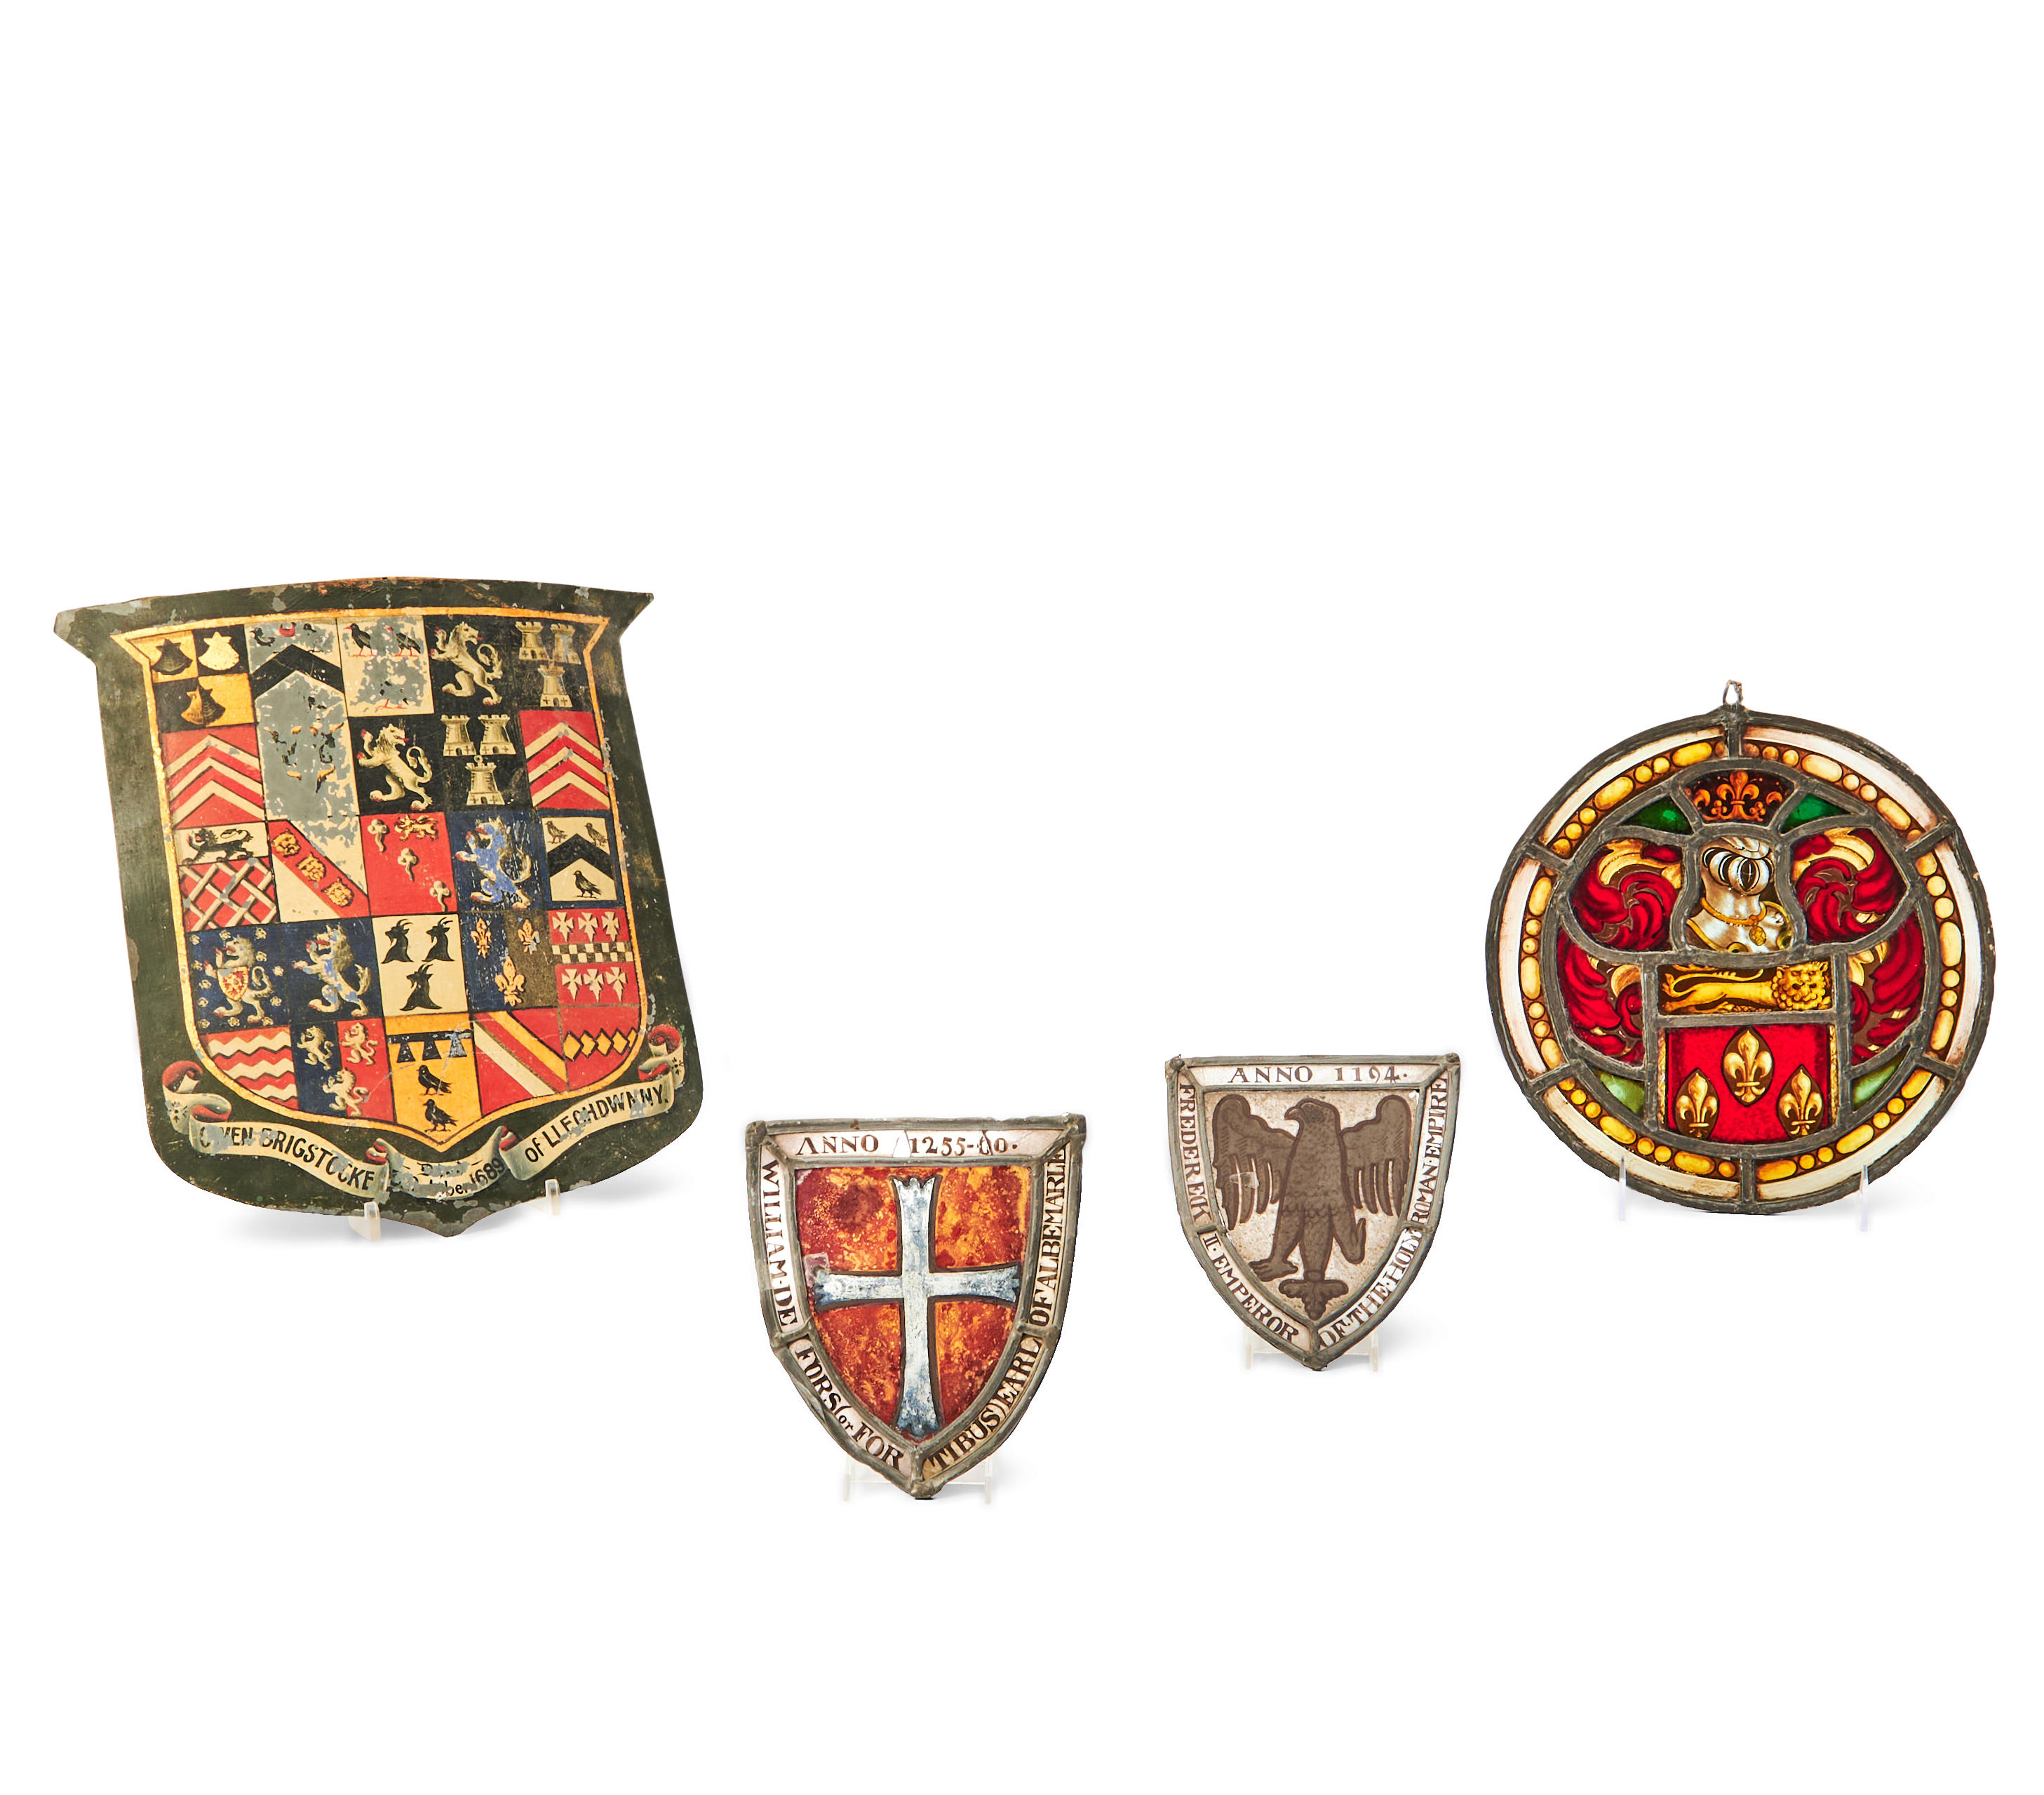 FOUR HERALDIC RELATED ITEMS, 19th